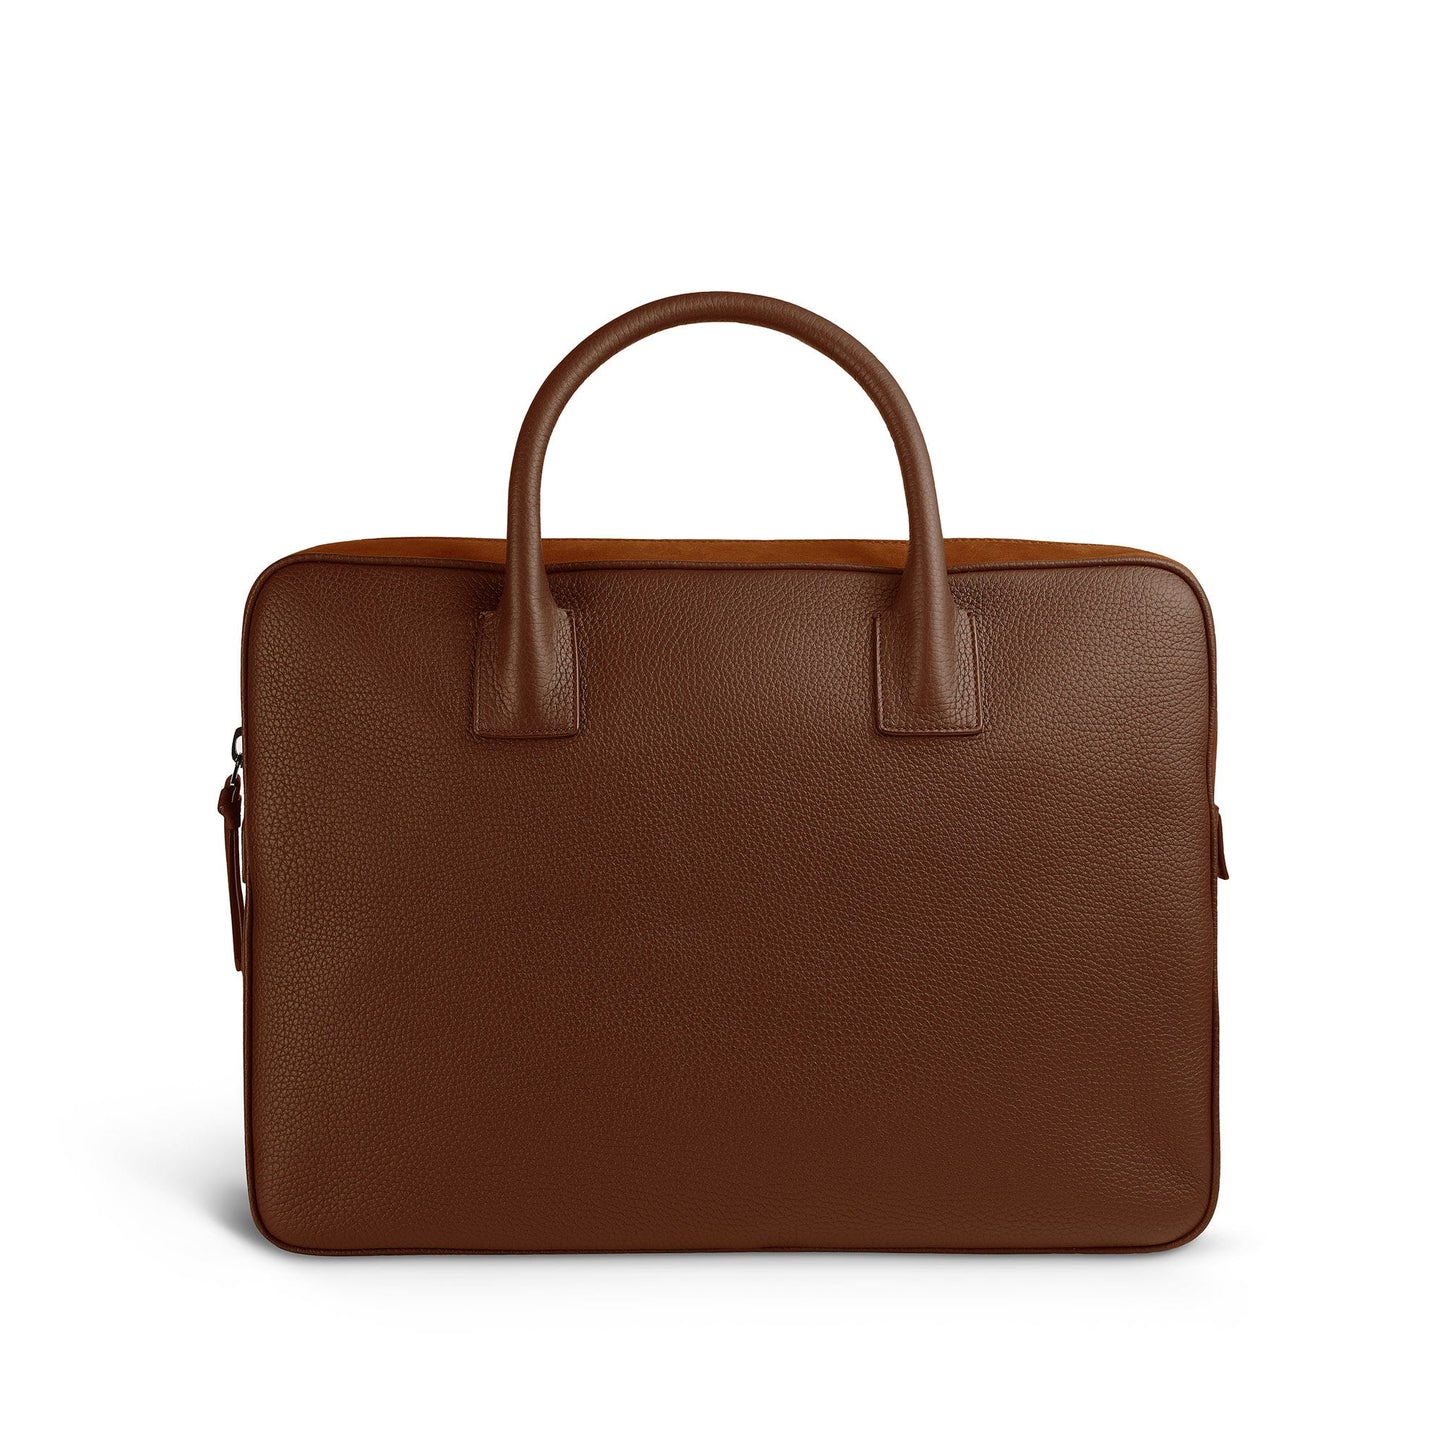 GMT Document Case in Soft Grain Leather